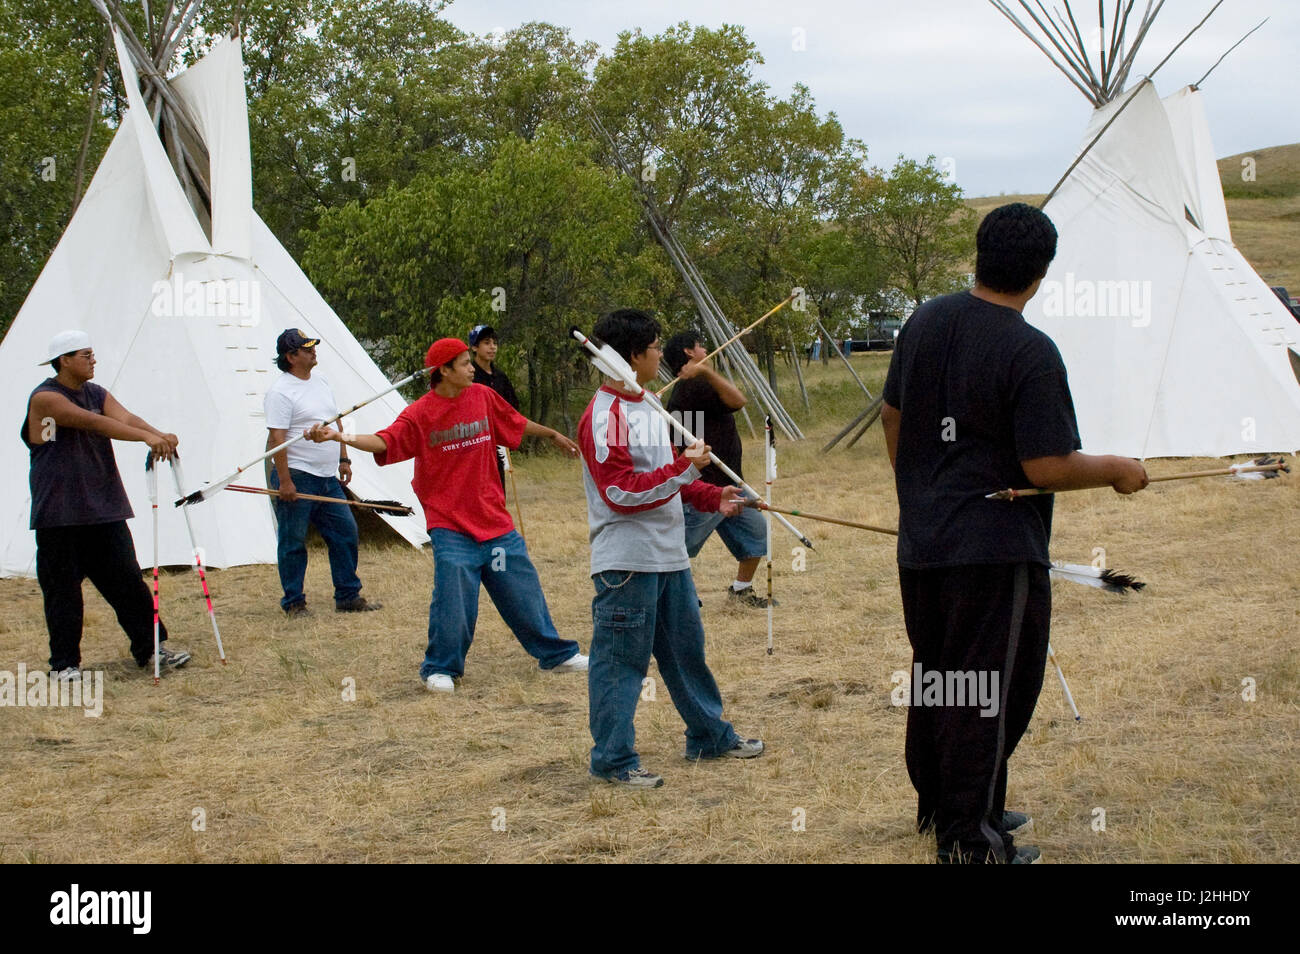 Three Affiliated tribes (Mandan, Arikara and Hidatsa) today continue to teach their children many of the traditional games of their ancestors such as the arrow toss game on the Fort Berthold Indian Reservation, North Dakota Stock Photo